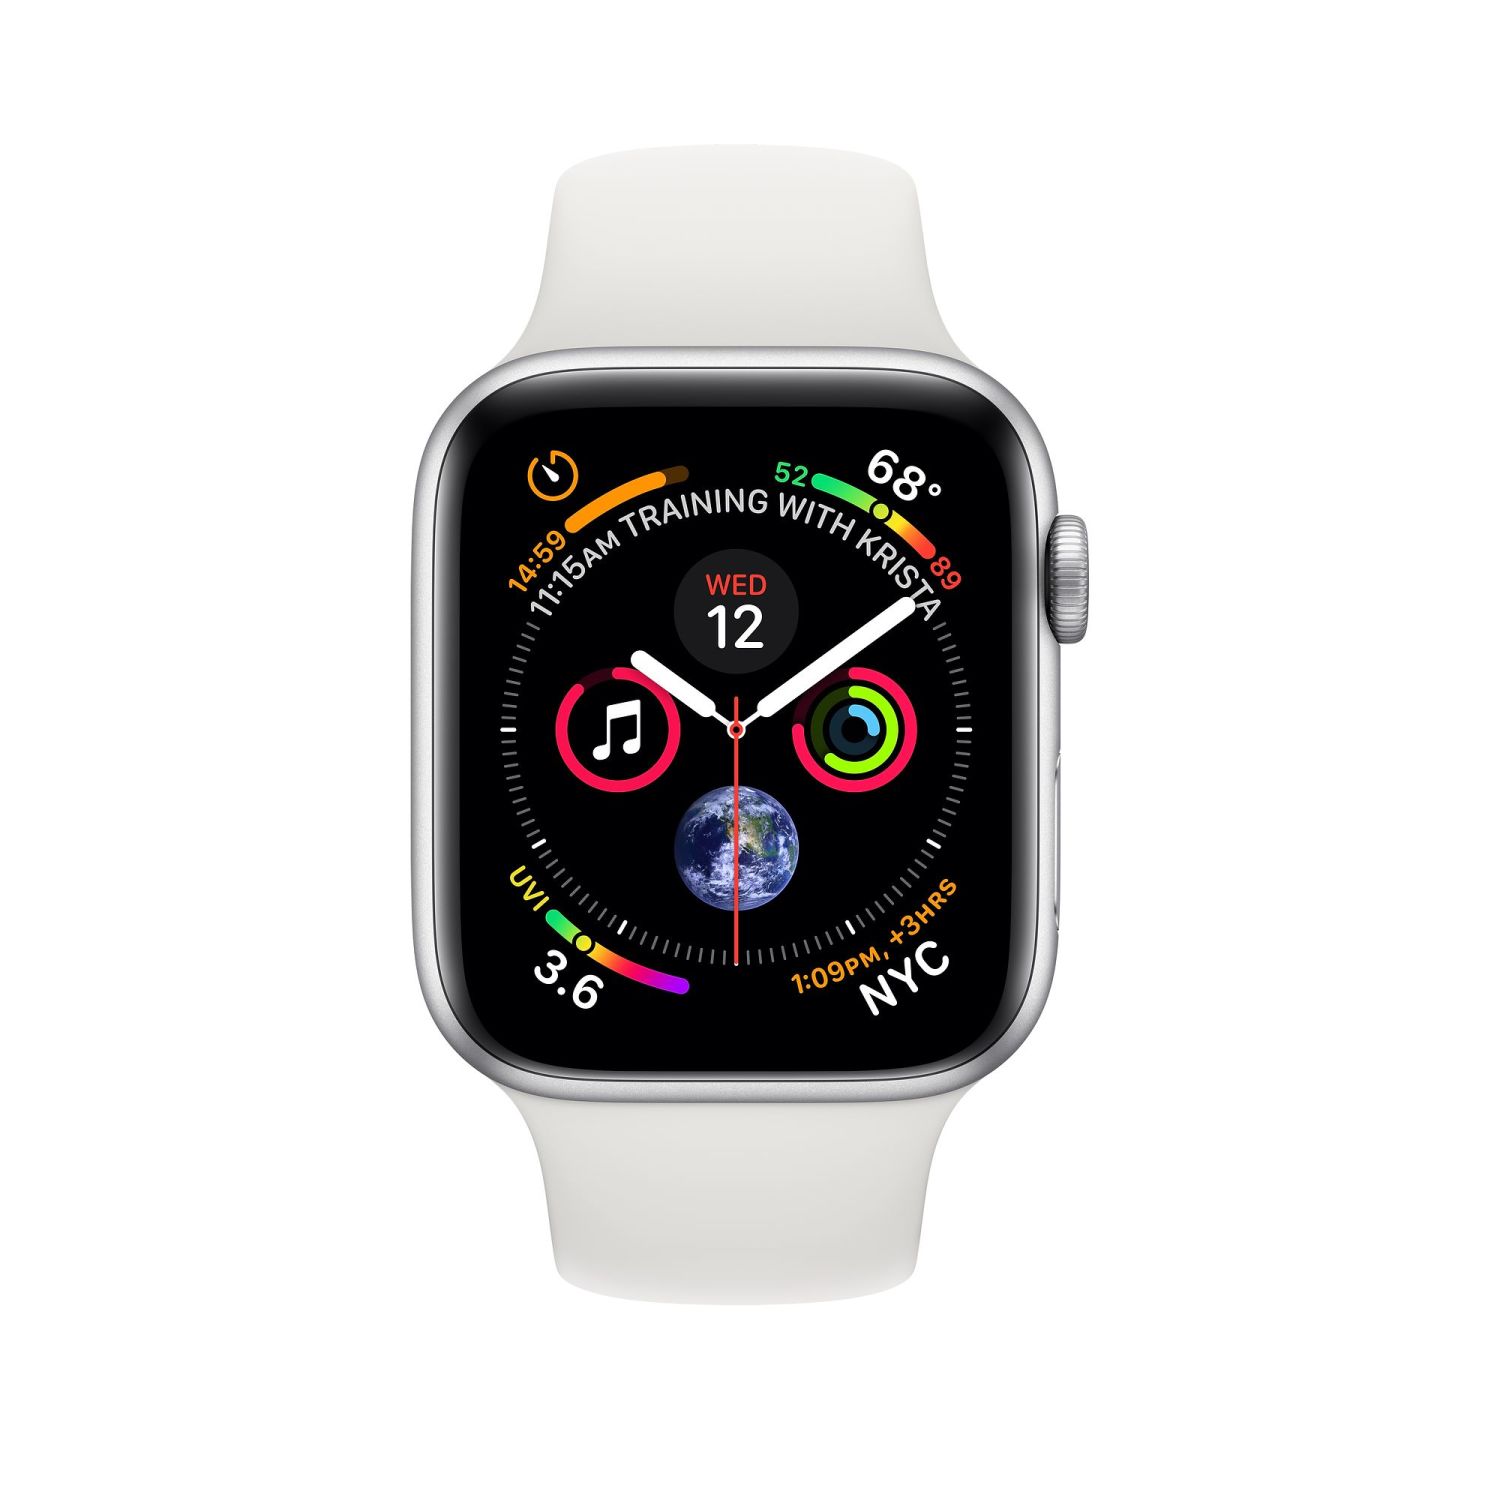 Apple Watch Series 4 (GPS + Cellular) 44mm Silver Aluminum Case with White Sport Loop (MTUU2) б/у